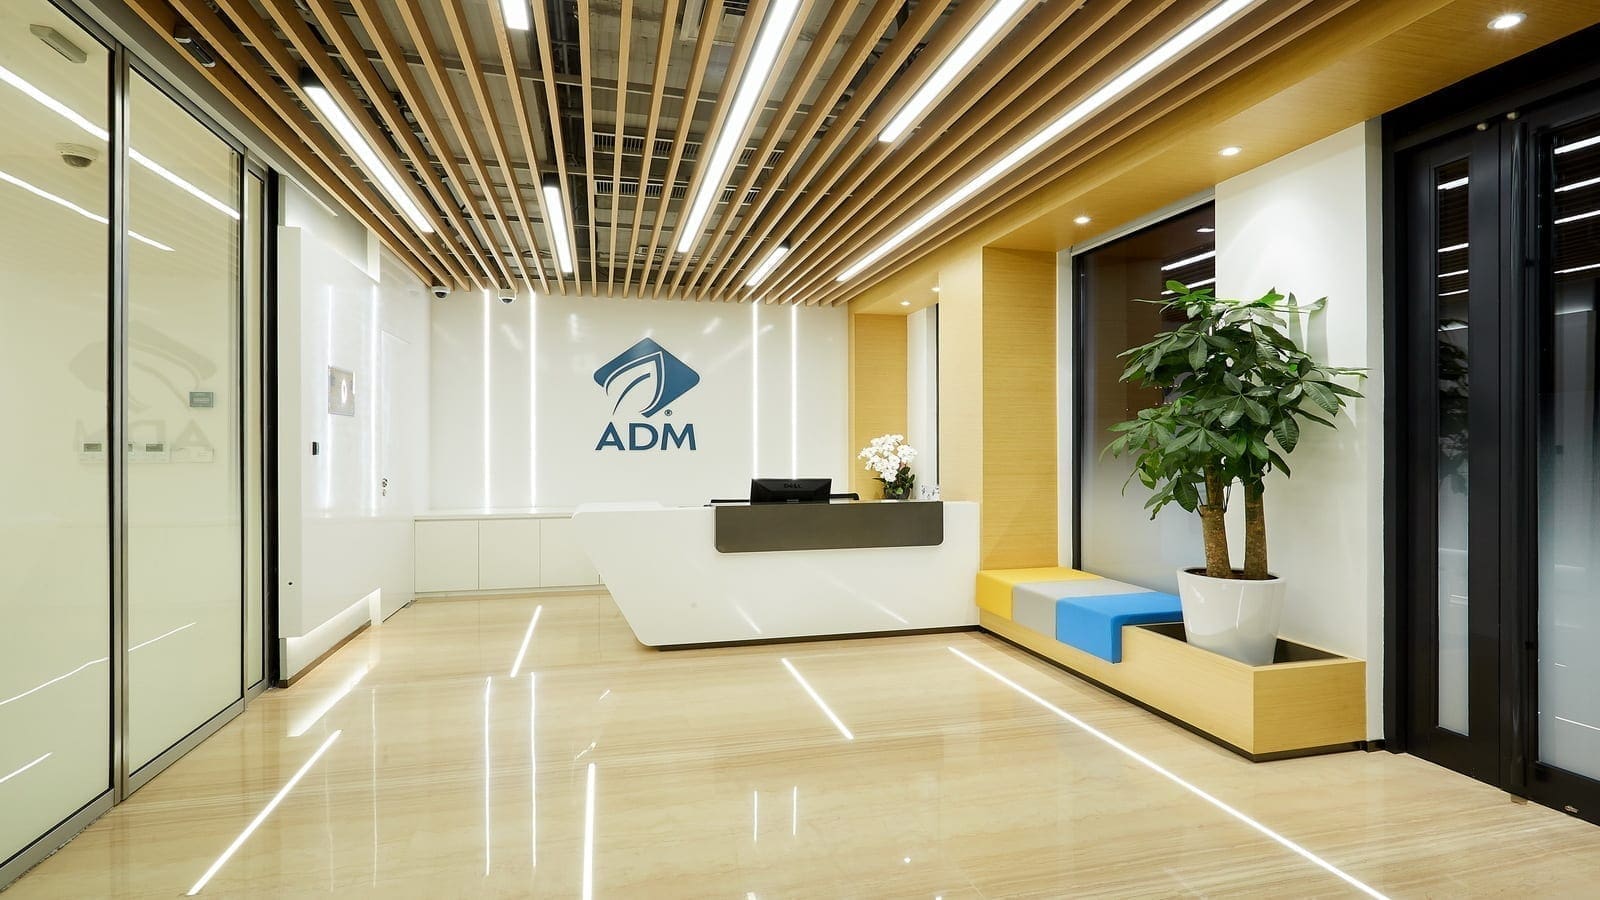 ADM invests in new microbiome solutions production facility in response to growing demand